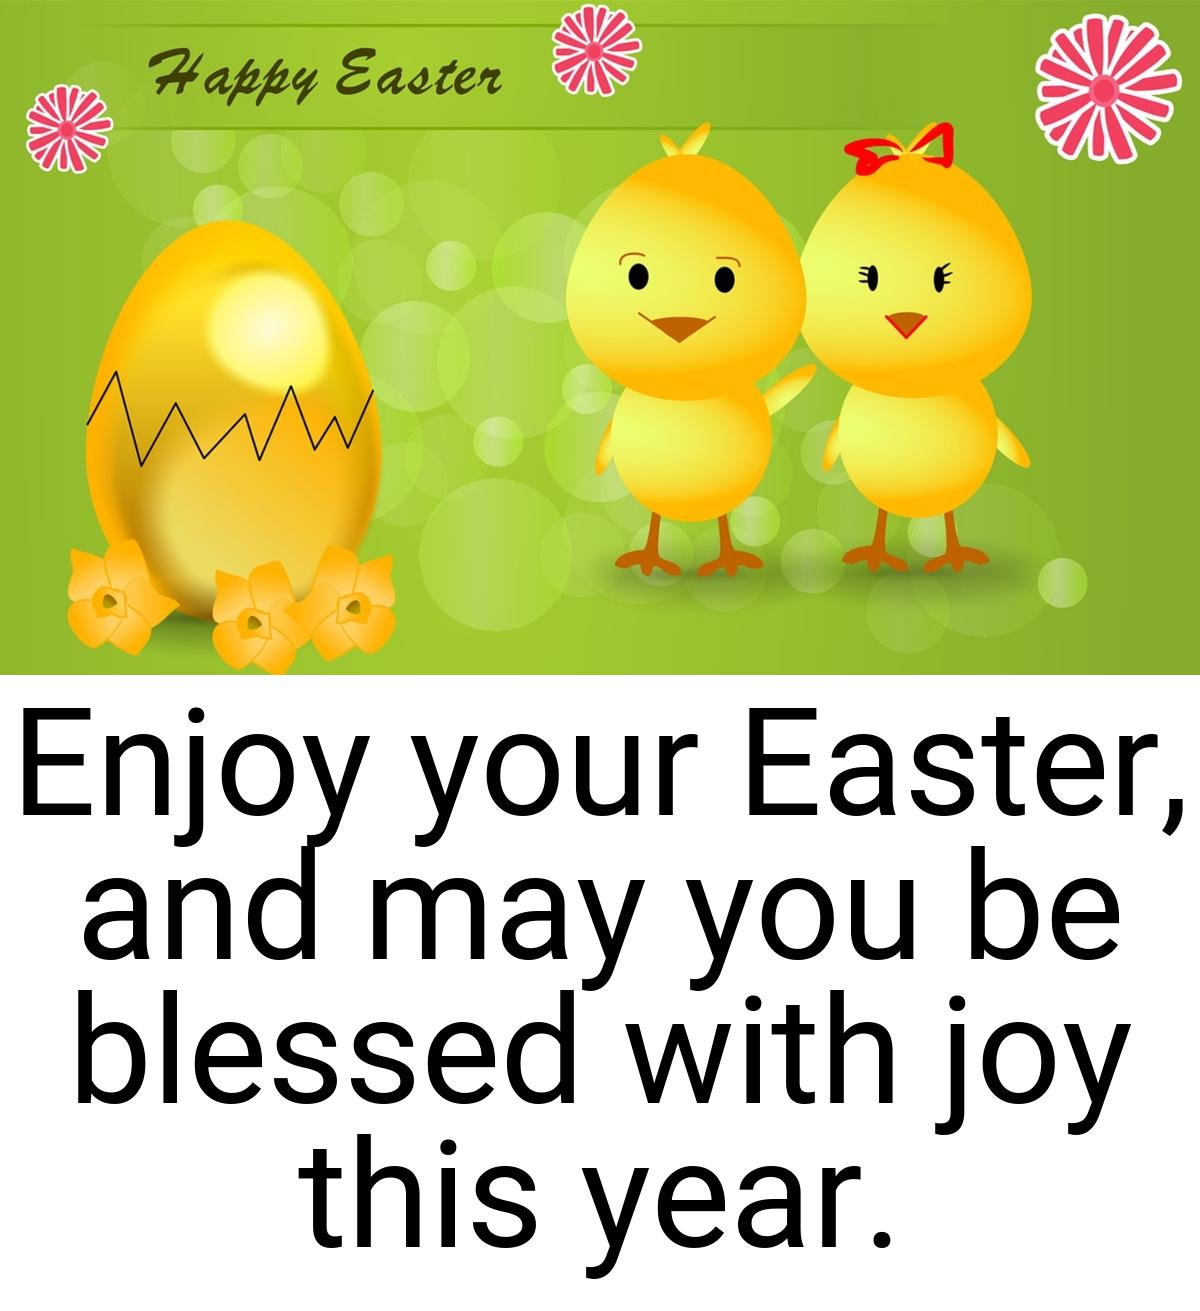 Enjoy your Easter, and may you be blessed with joy this